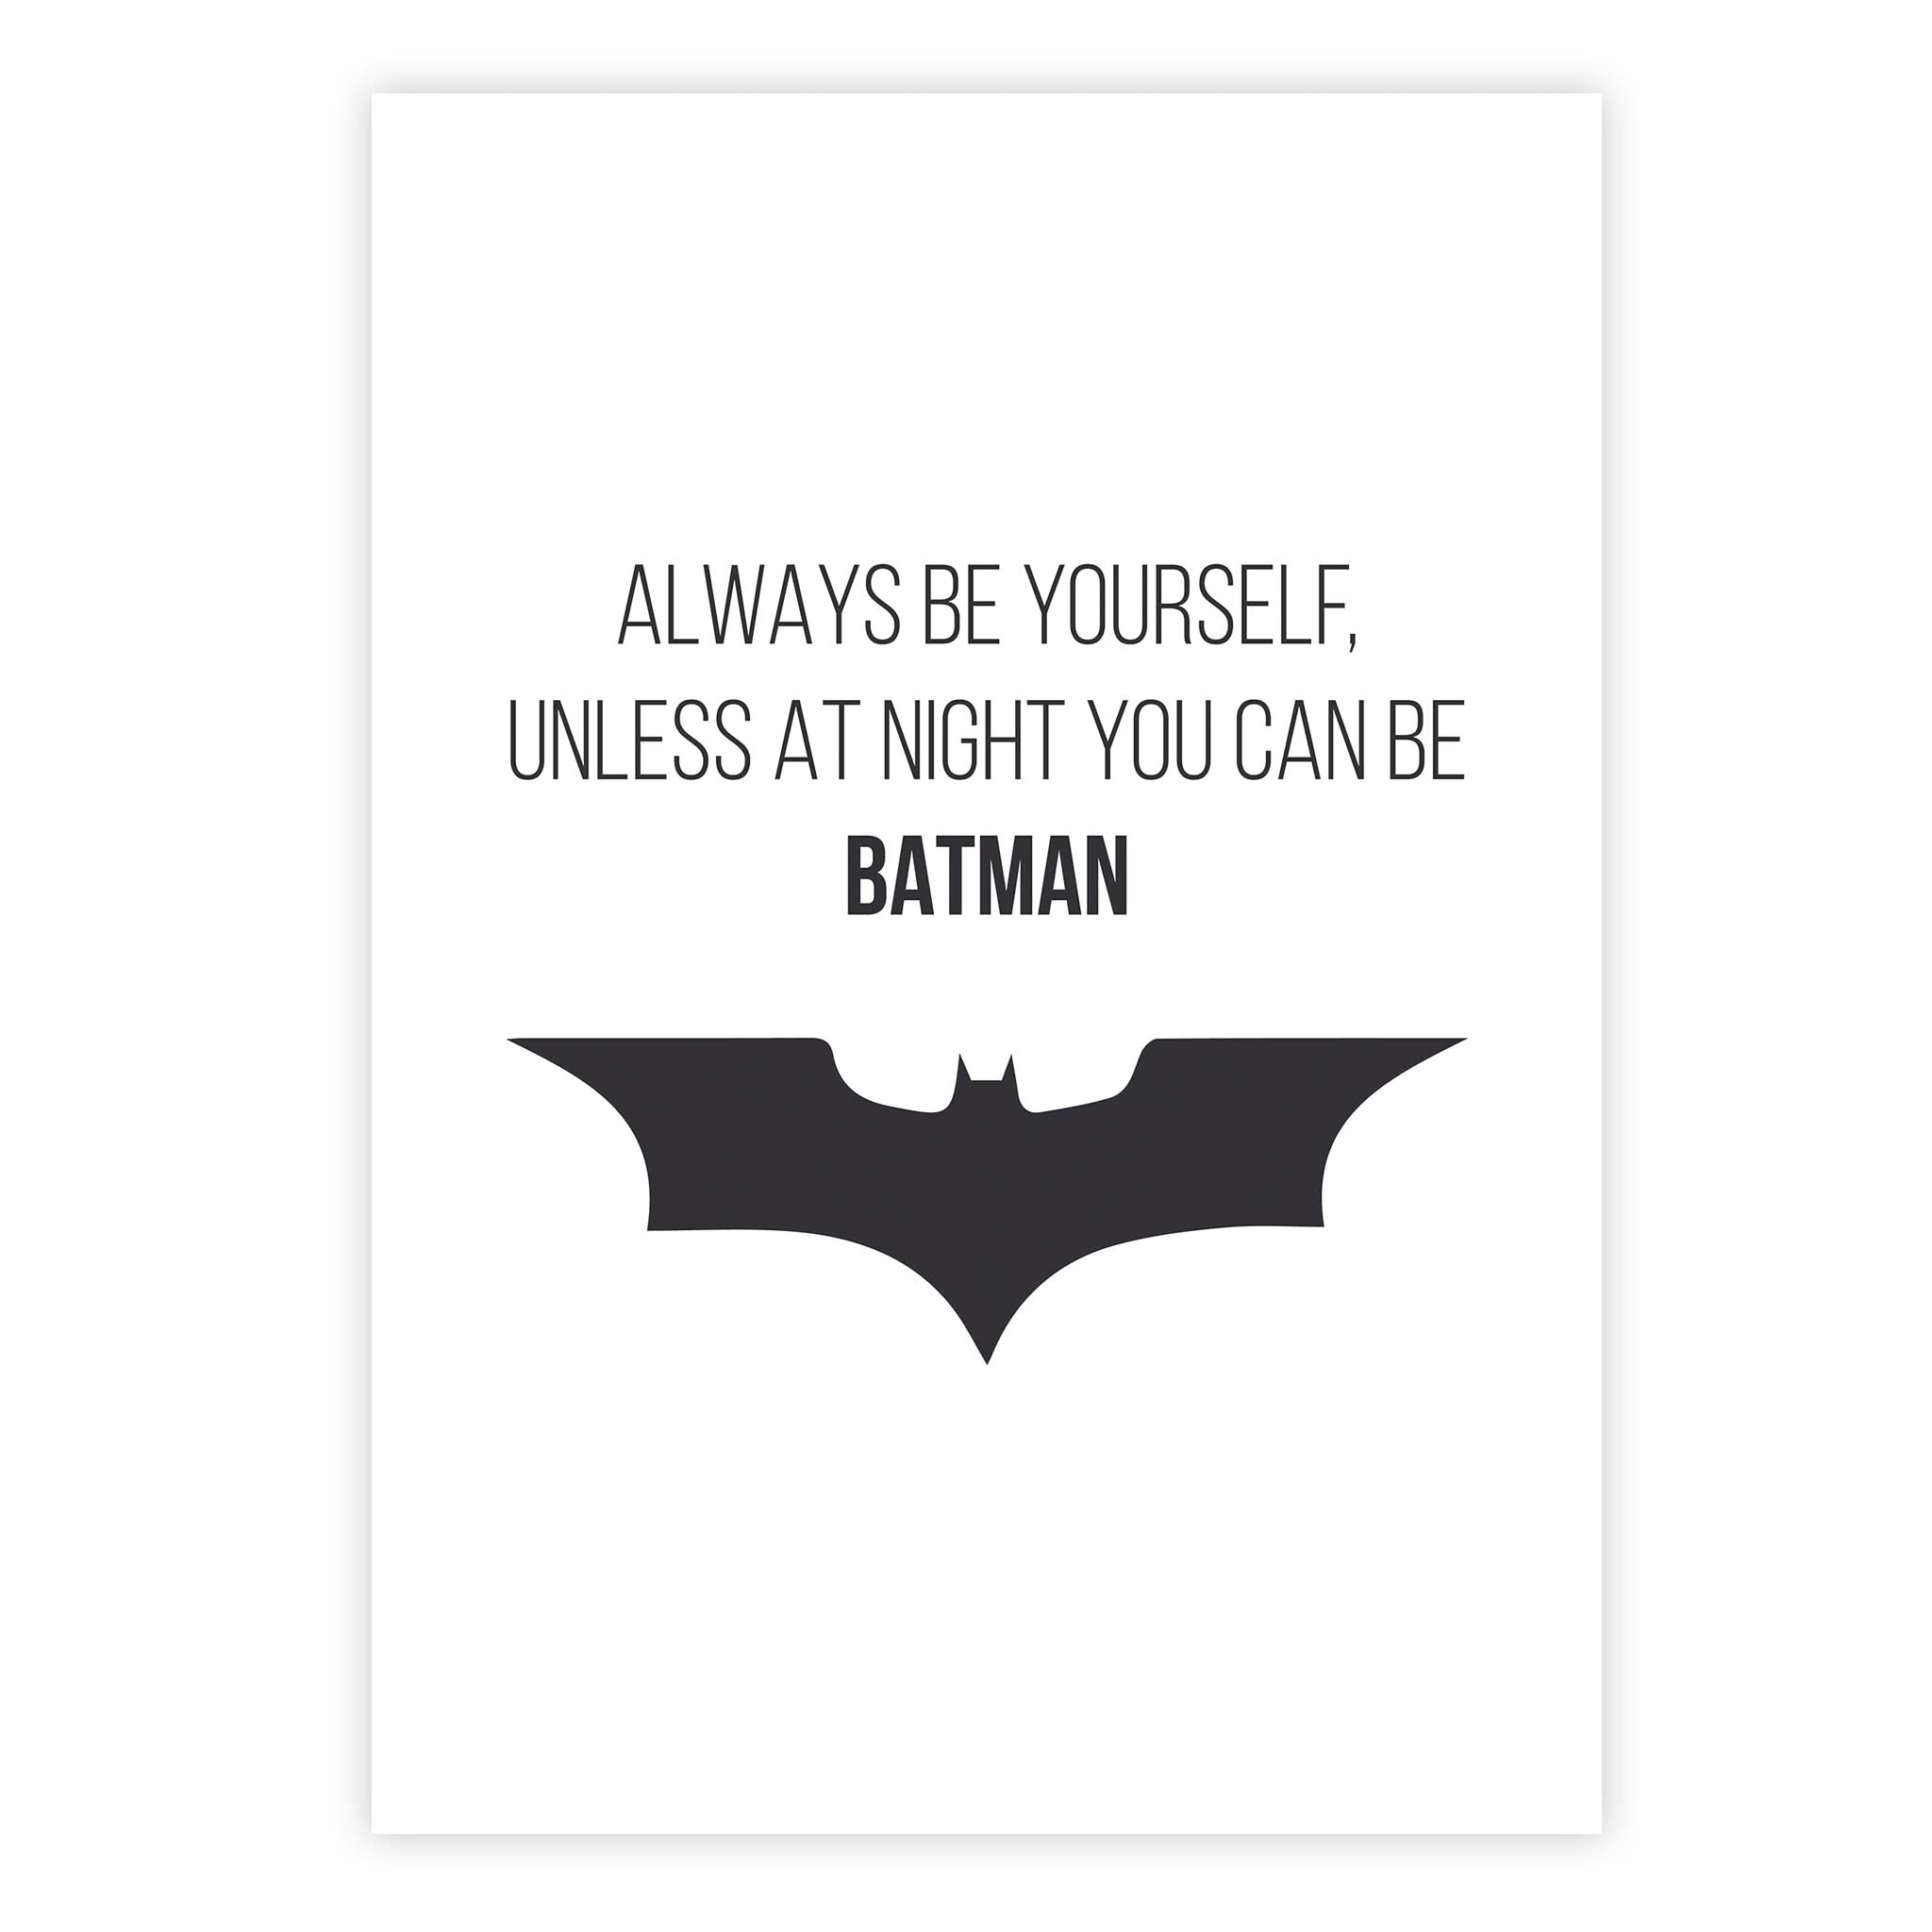 Always be yourself, unless at night you can be Batman